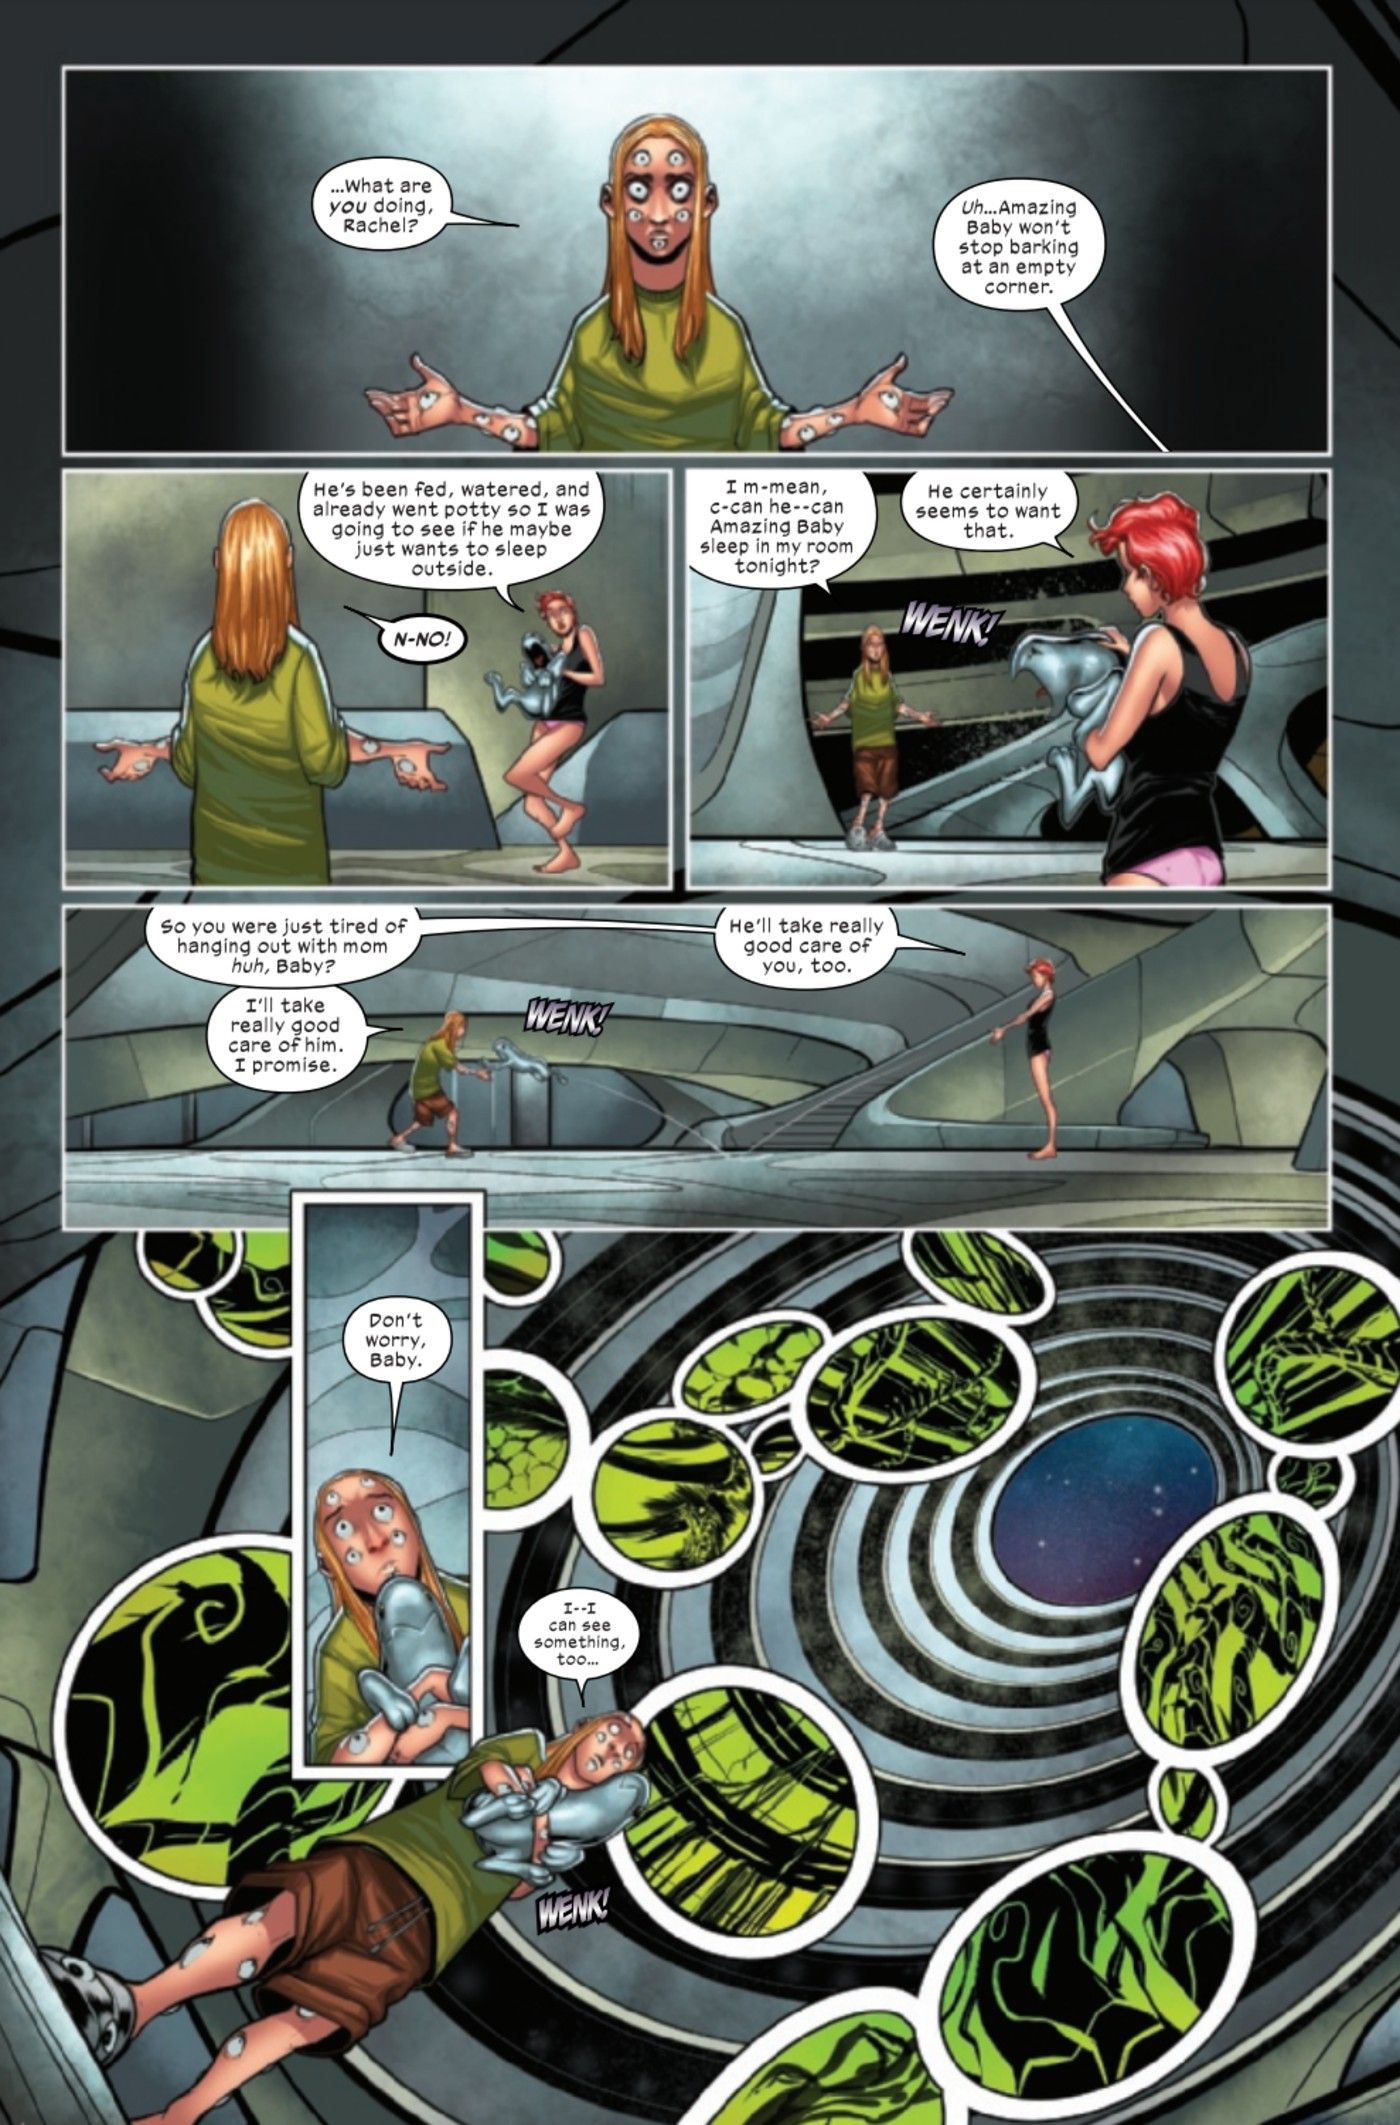 X-Factor 18 preview page 3